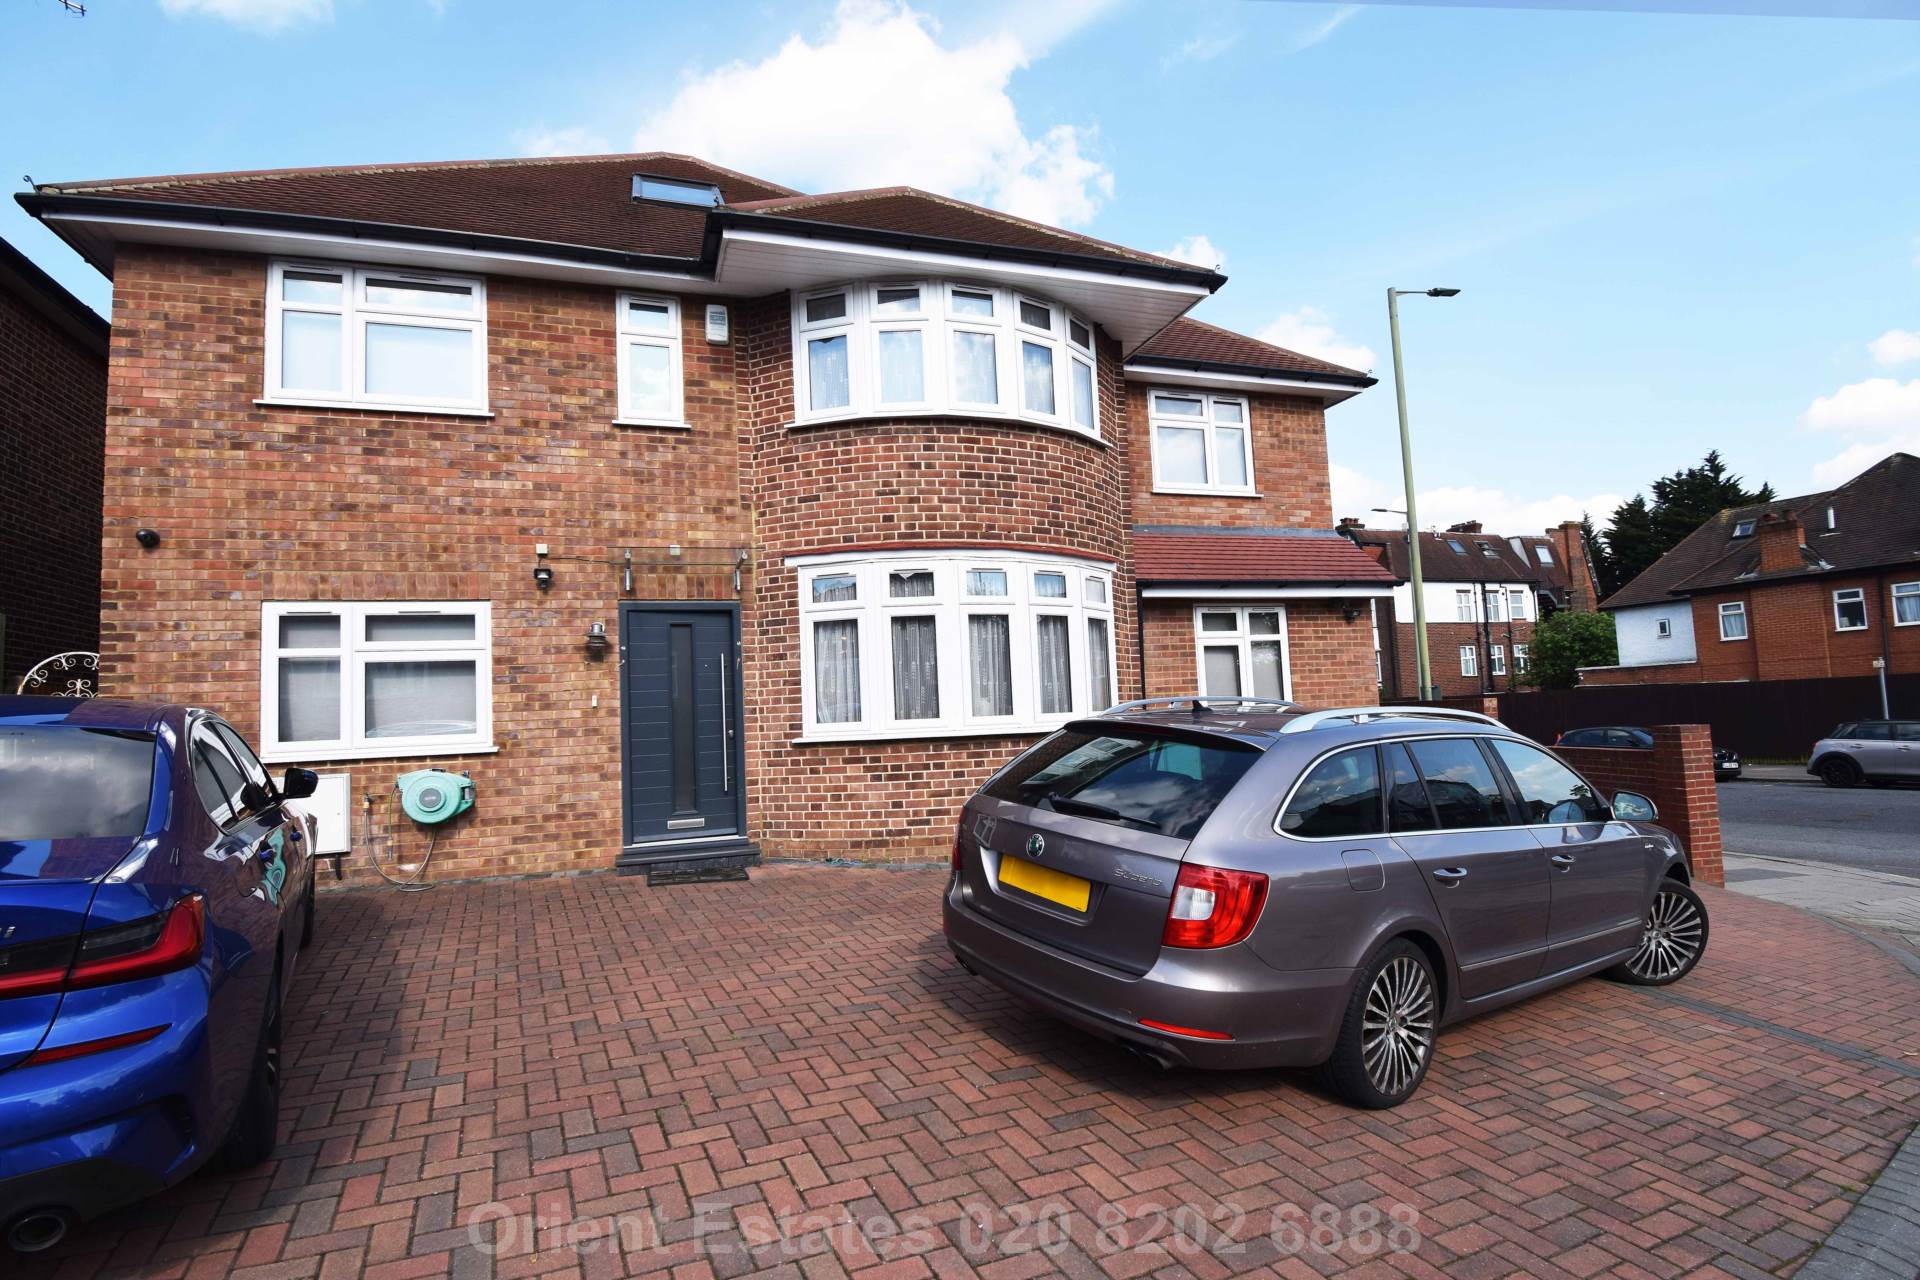 5 bed Detached House for rent in Hendon. From Orient Estates